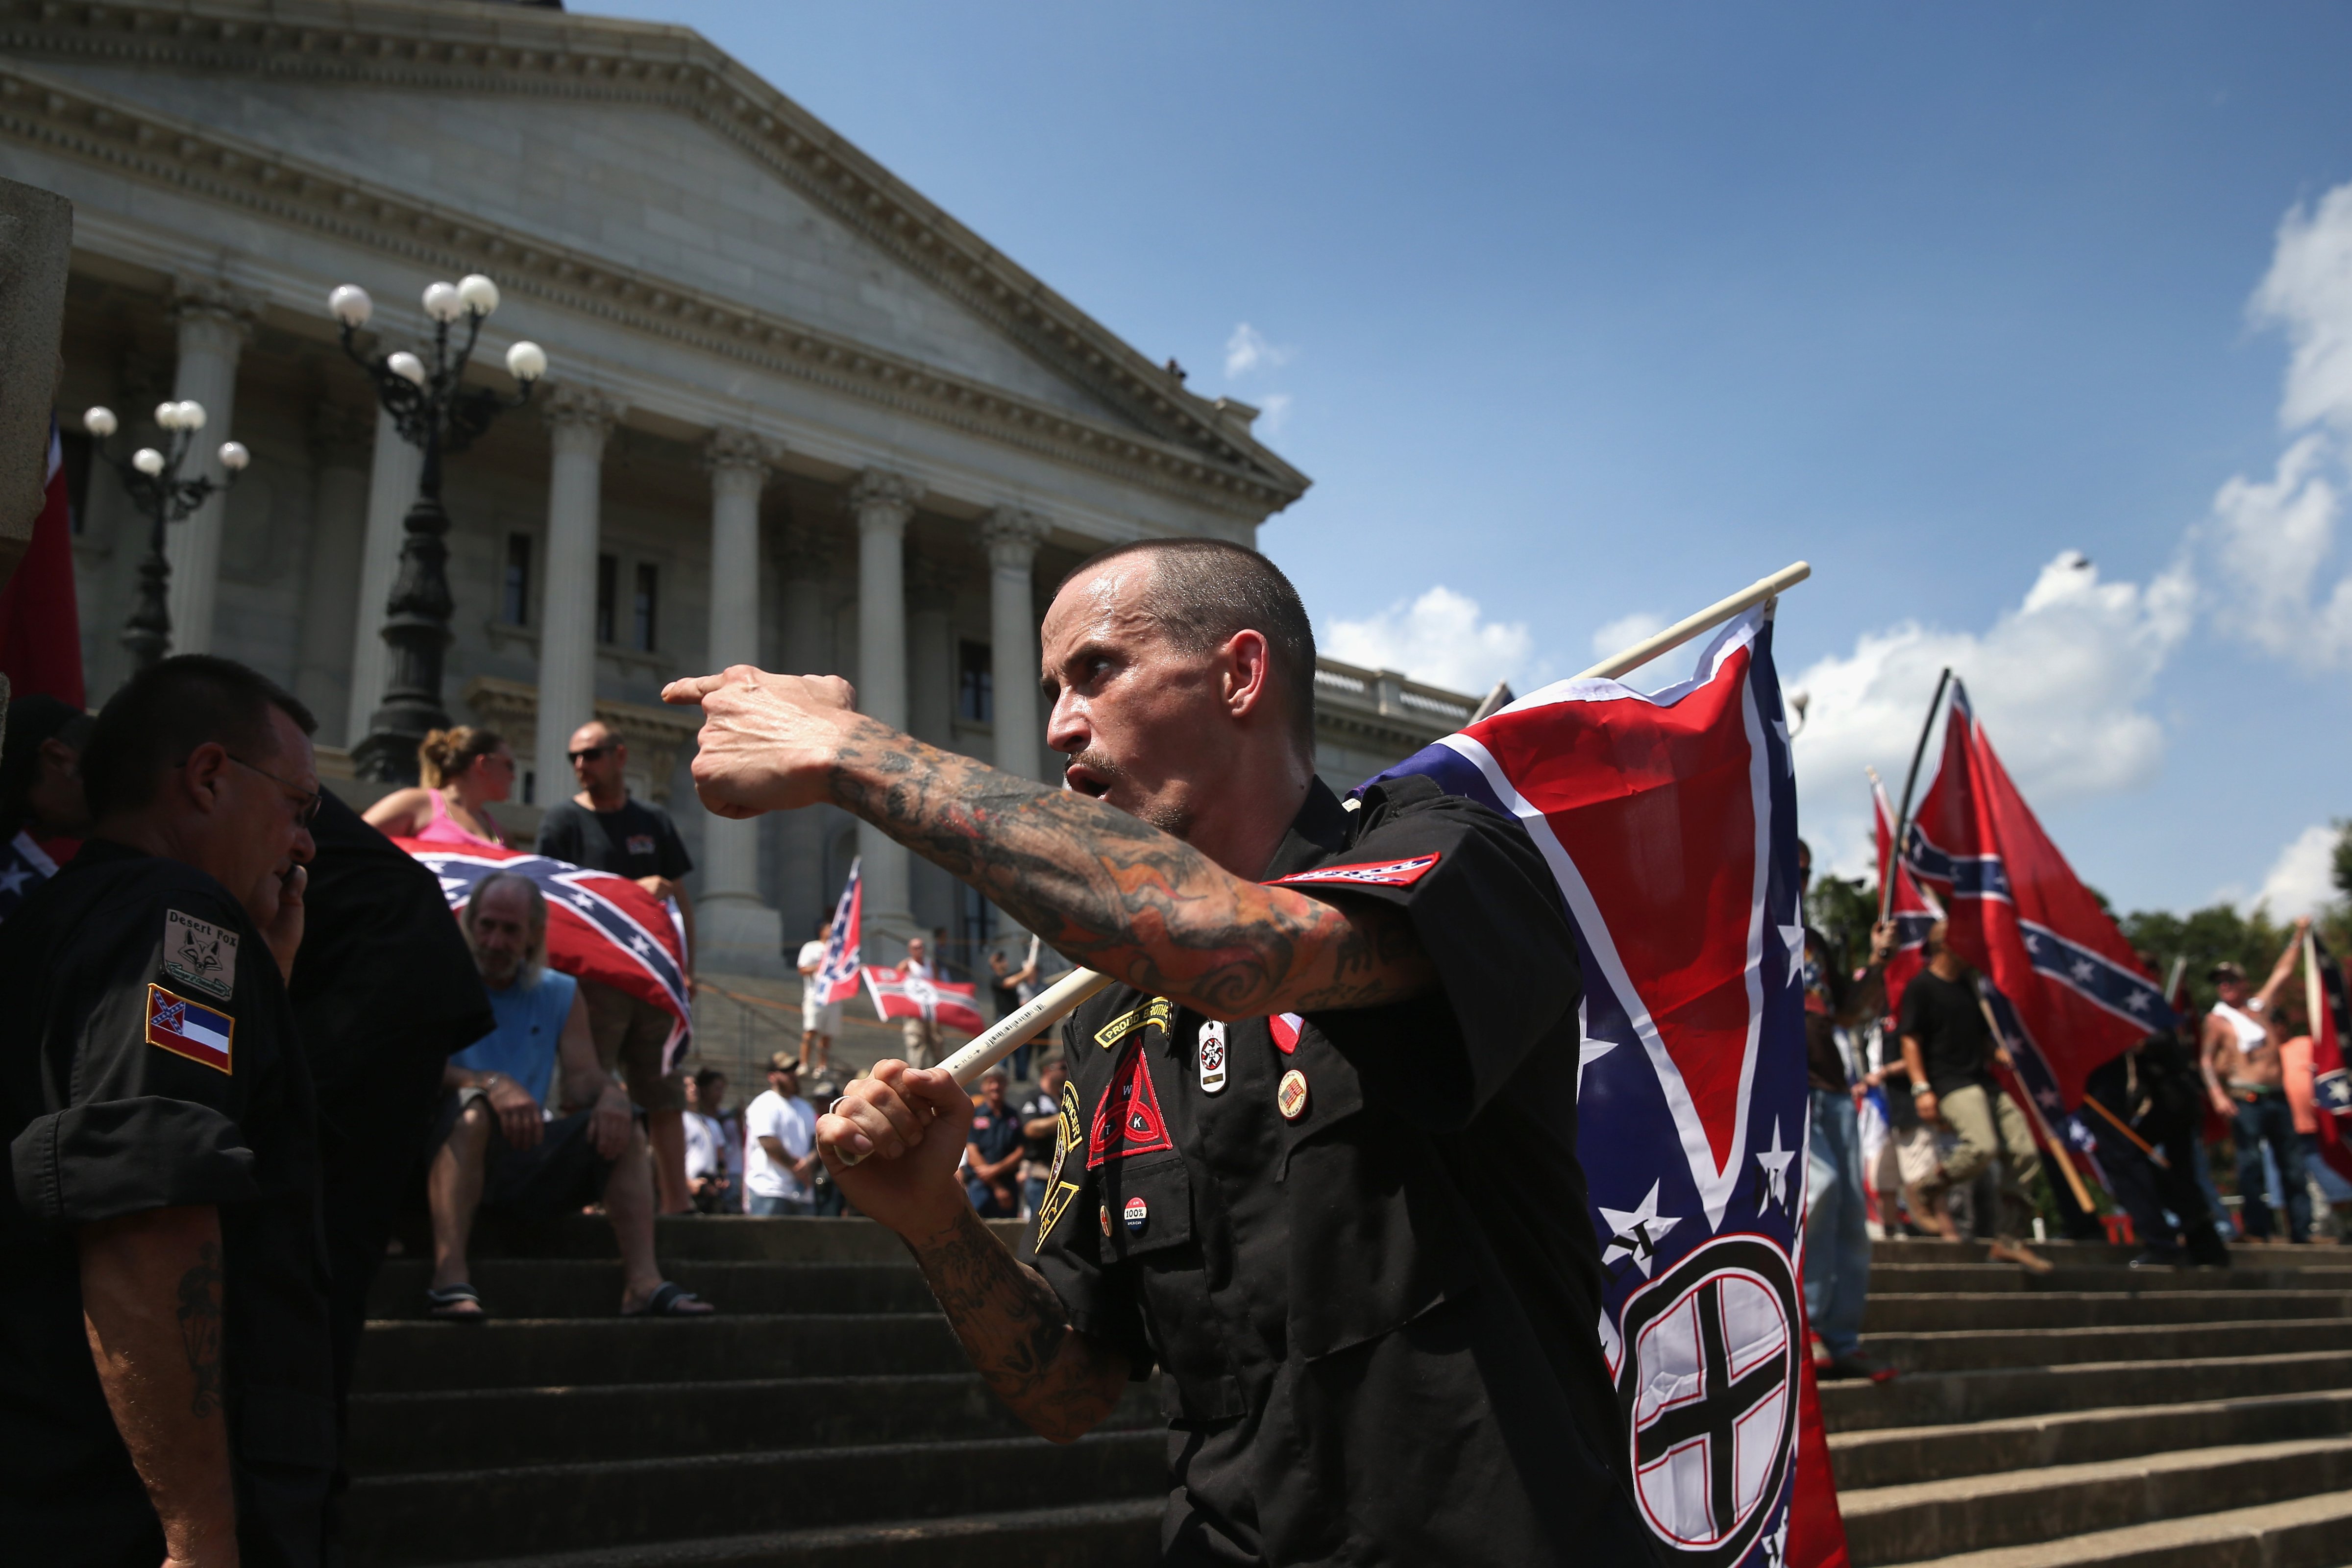 Counter protesters and Ku Klux Klan members argue at a Klan demonstration at the state house building  in Columbia, SC on July 18, 2015. (John Moore—Getty Images)